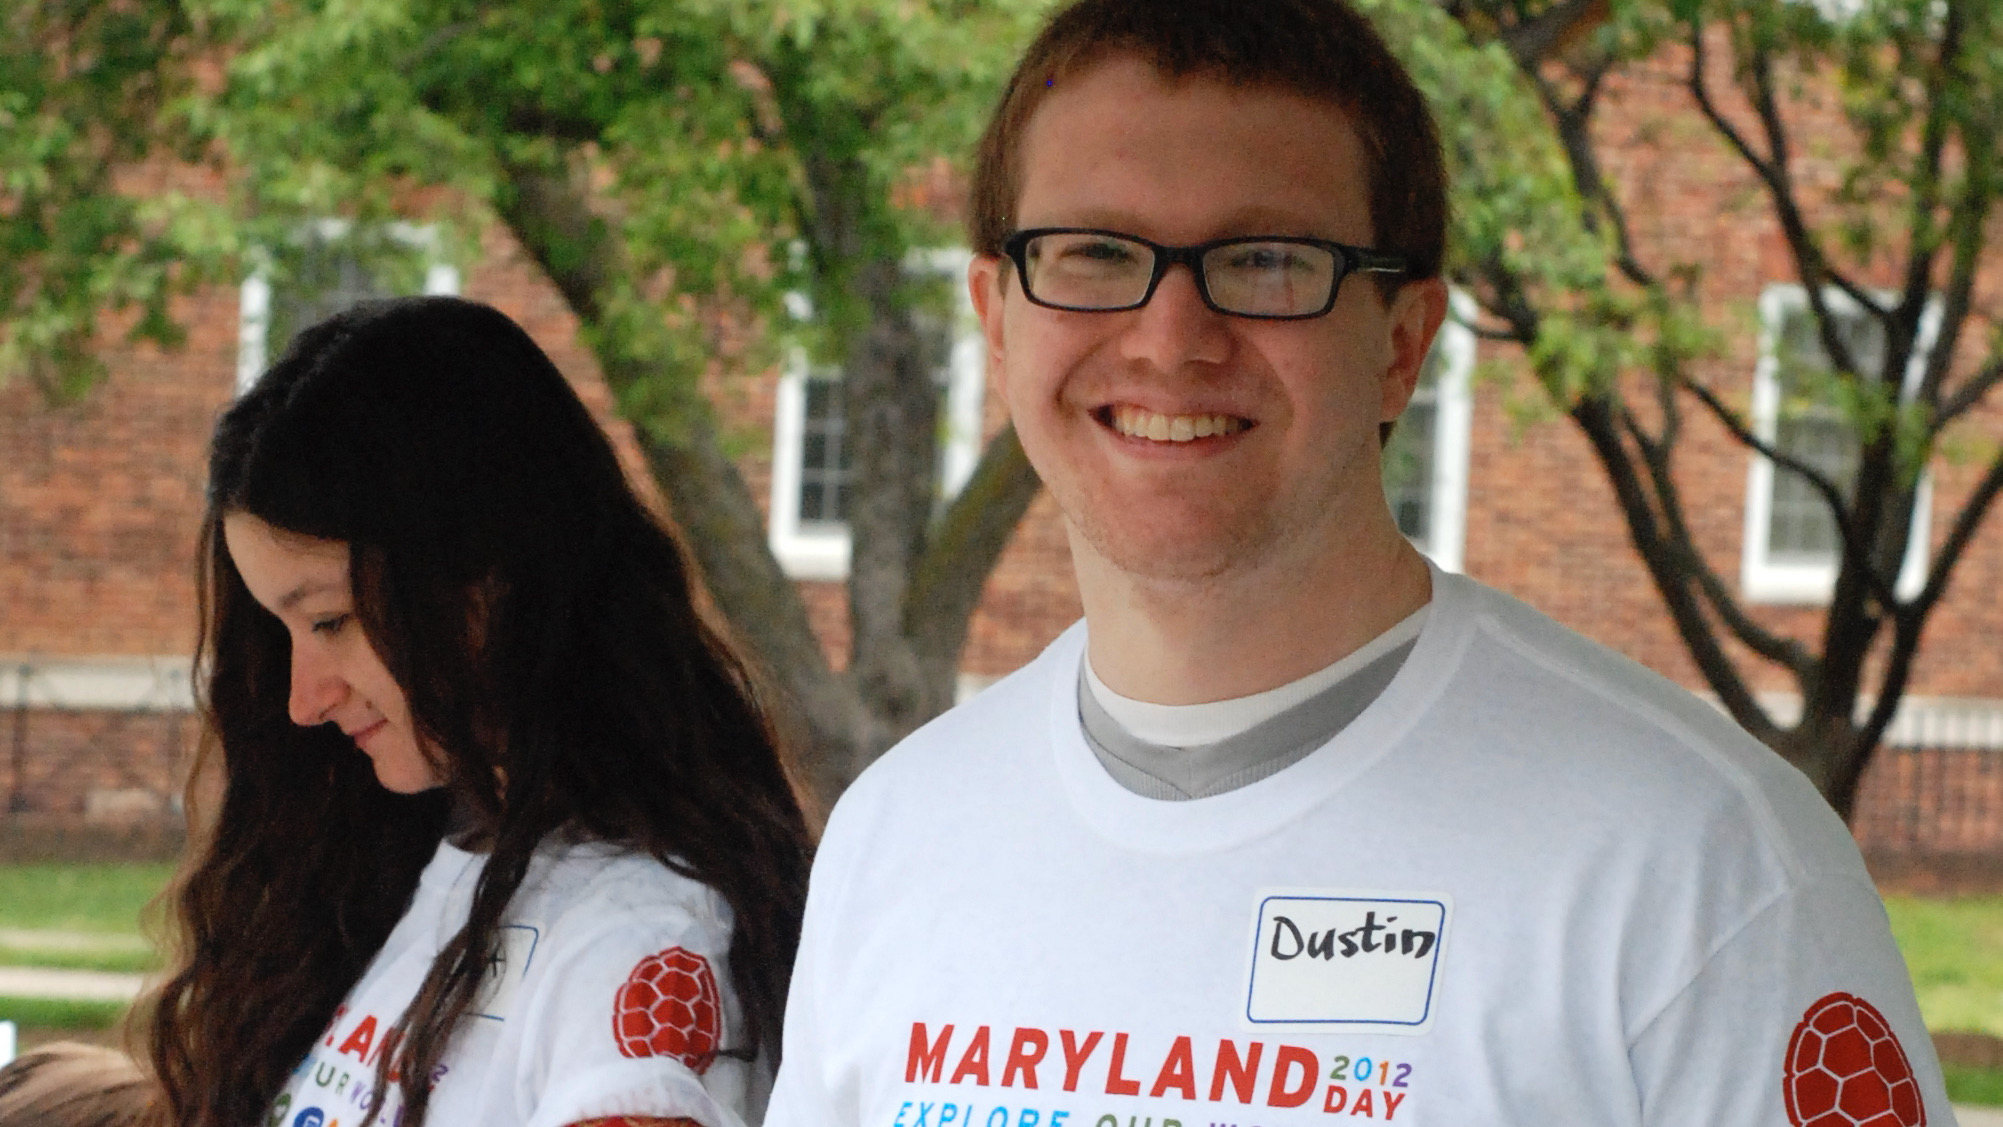 A young man in glasses standing outside, wearing a "Maryland Day" t-shirt, smiling at the camera.